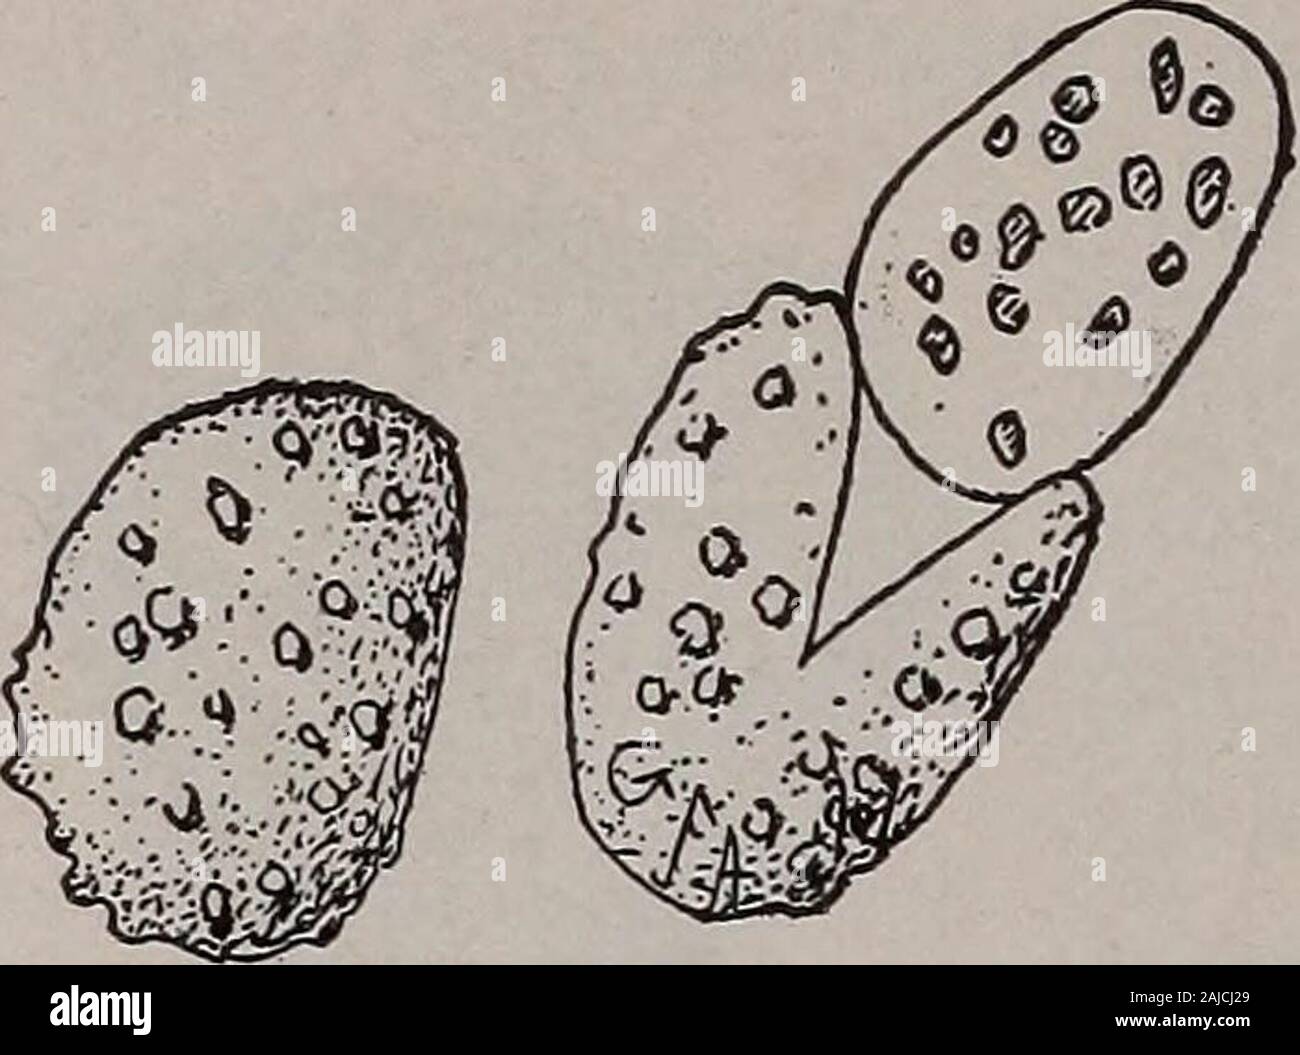 Elementary botany . Fig. 299 Spore of Aspidiumacrostichoides withwinged exospore. Fig. 300. Spore crushed to remove exospore andshow endospore. 264 MORPHOLOG Y.. Fig. 30r.Spores of asplenium ; exospore removed from the one at the right. point. A spore of the Christmas fern is shown in fig. 299. Theouter wall here is more or less winged. At fig. 300 is a spore of the same species from which theouter wall has been crushed, showingthat there is an inner wall also. Ifpossible we should study the germi-nation of the spores of some fern. 552. Germination of the spores.—After the spores have been sow Stock Photo